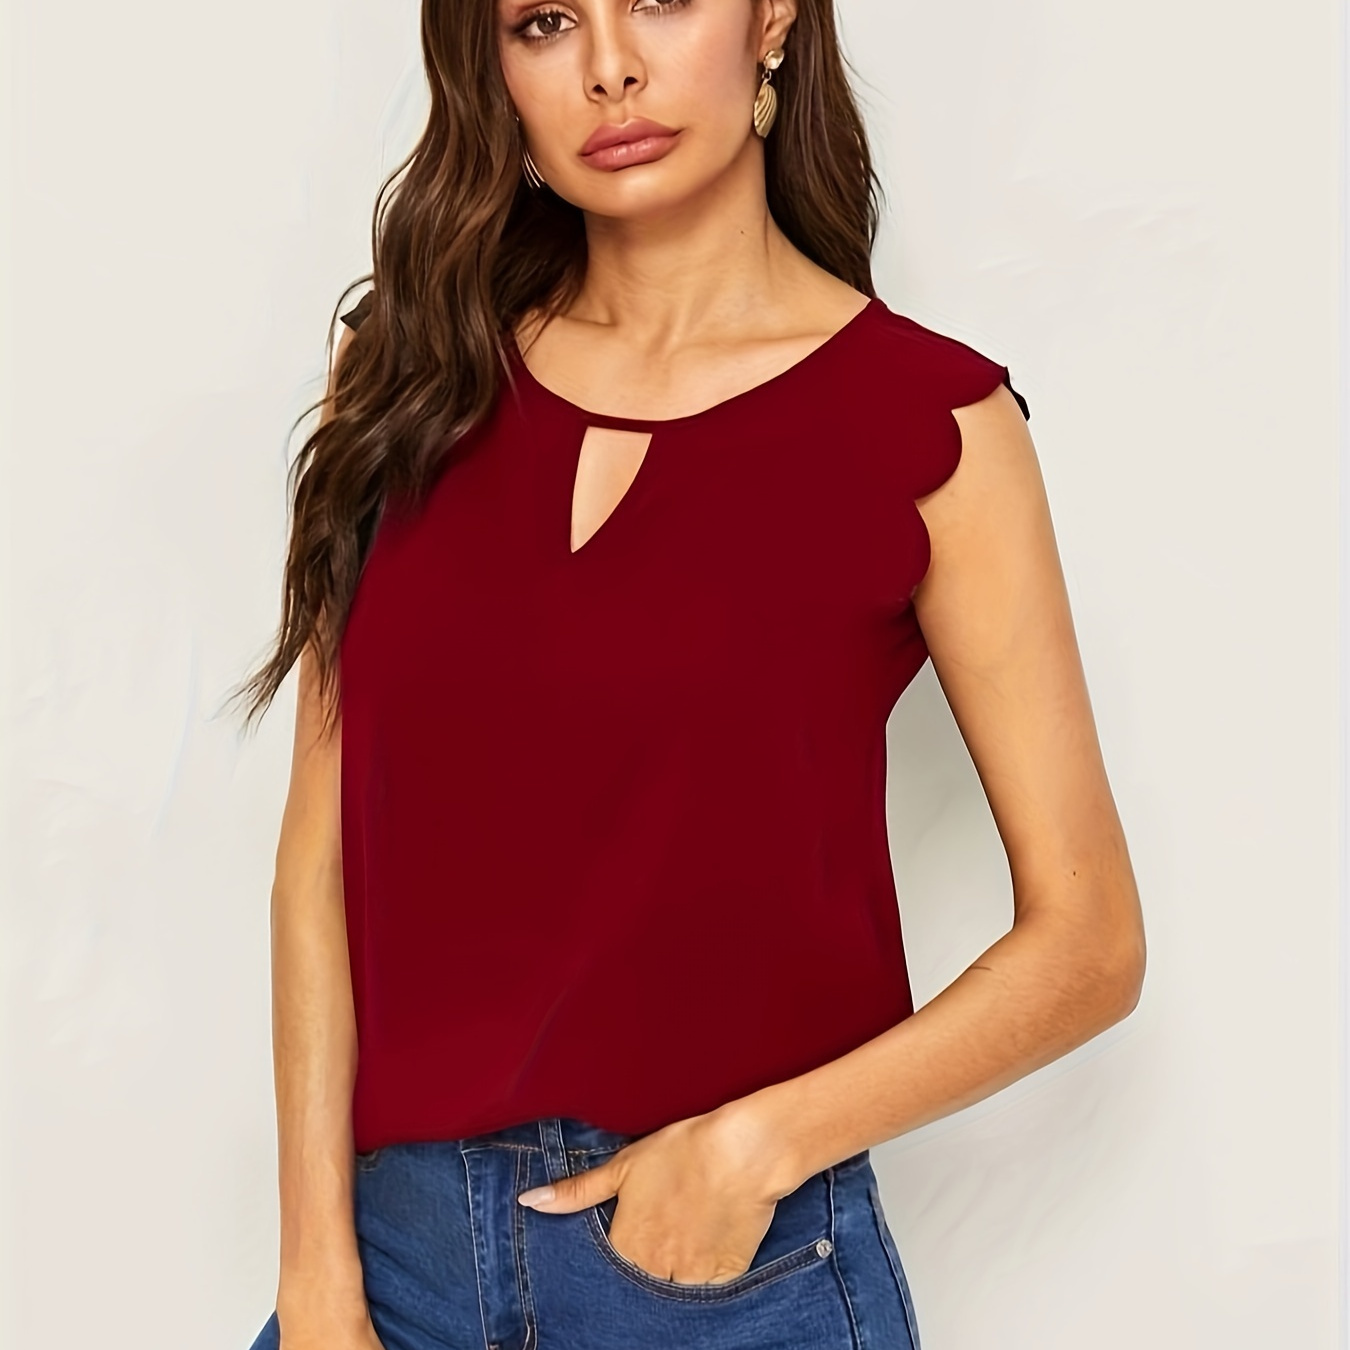 

Solid Color Keyhole Blouse, Elegant Scallop Trim Sleeveless Top For Spring & Summer, Women's Clothing